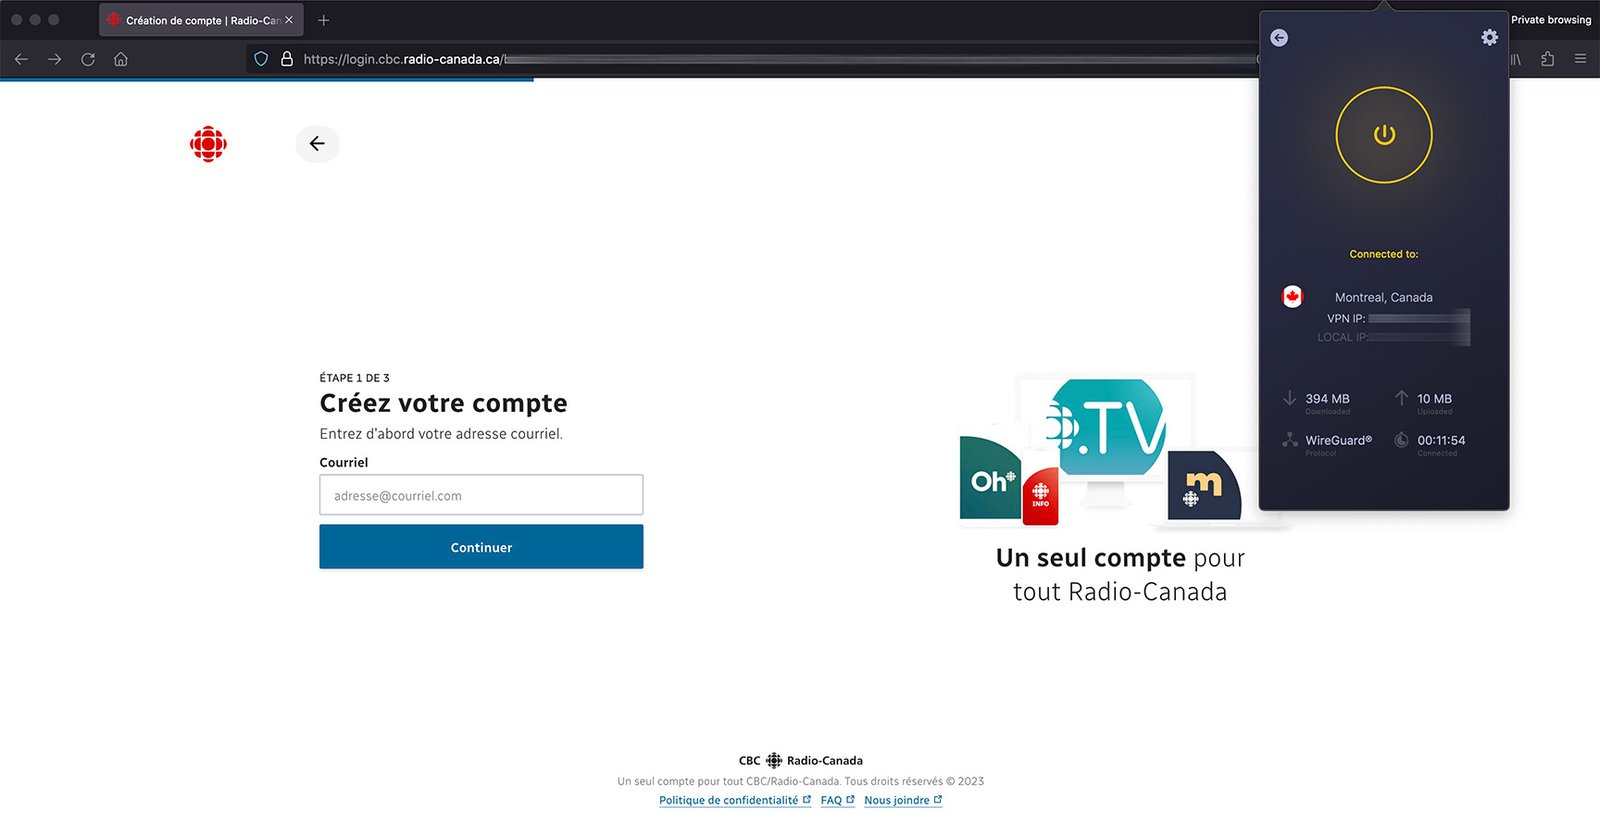 Watch Extra content of ICI TOU TV abroad outside Canada using CyberGhost VPN